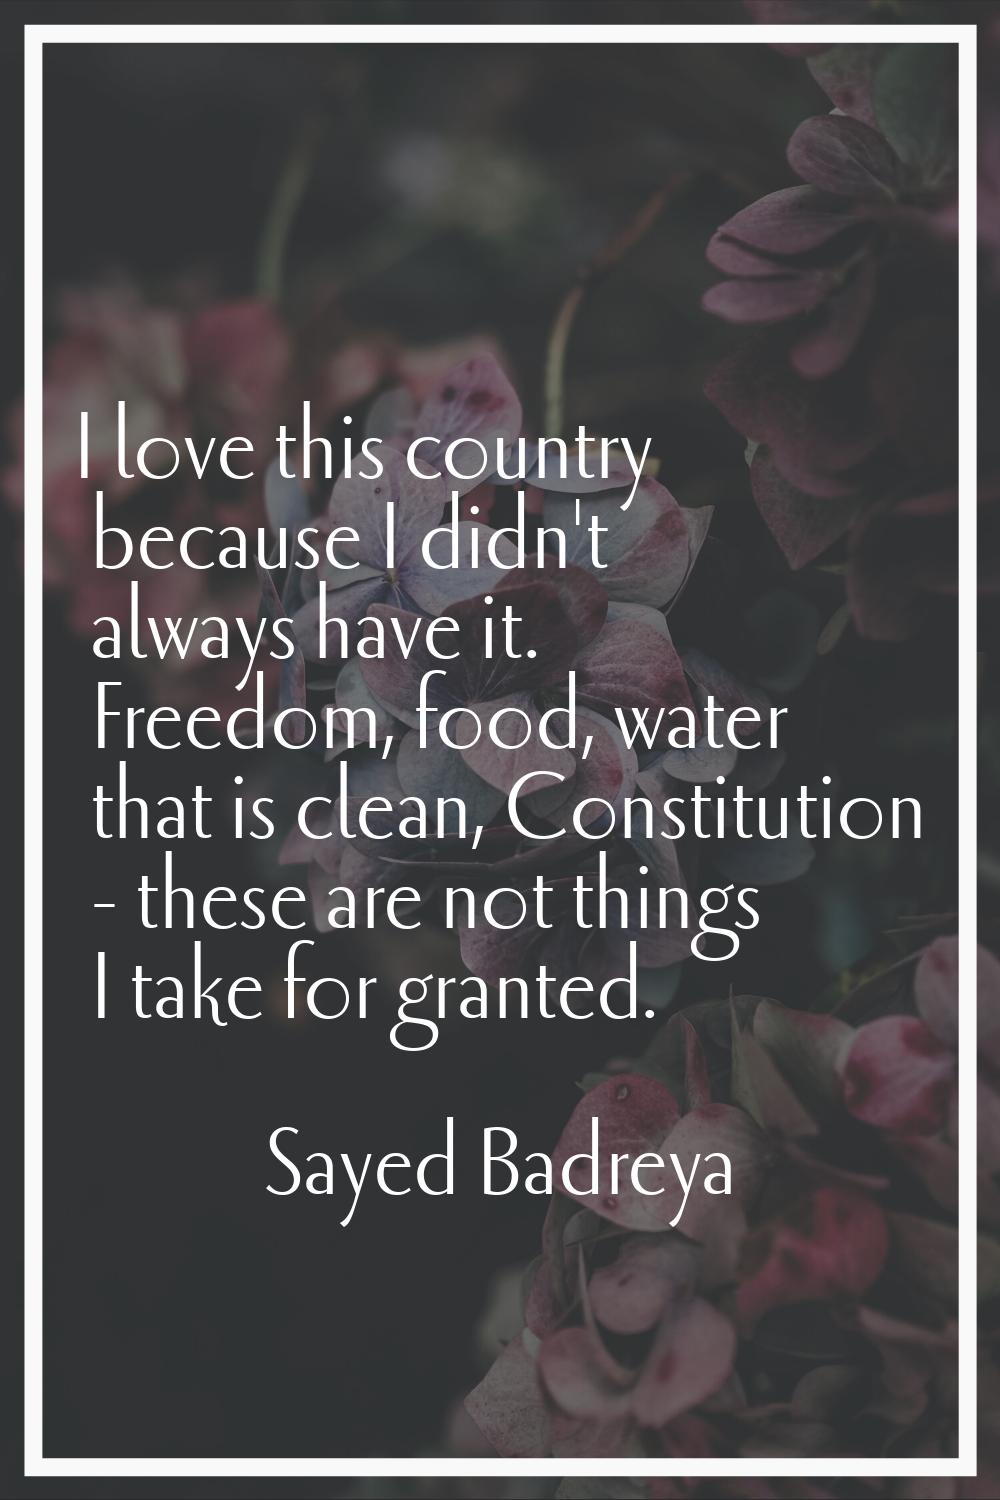 I love this country because I didn't always have it. Freedom, food, water that is clean, Constituti